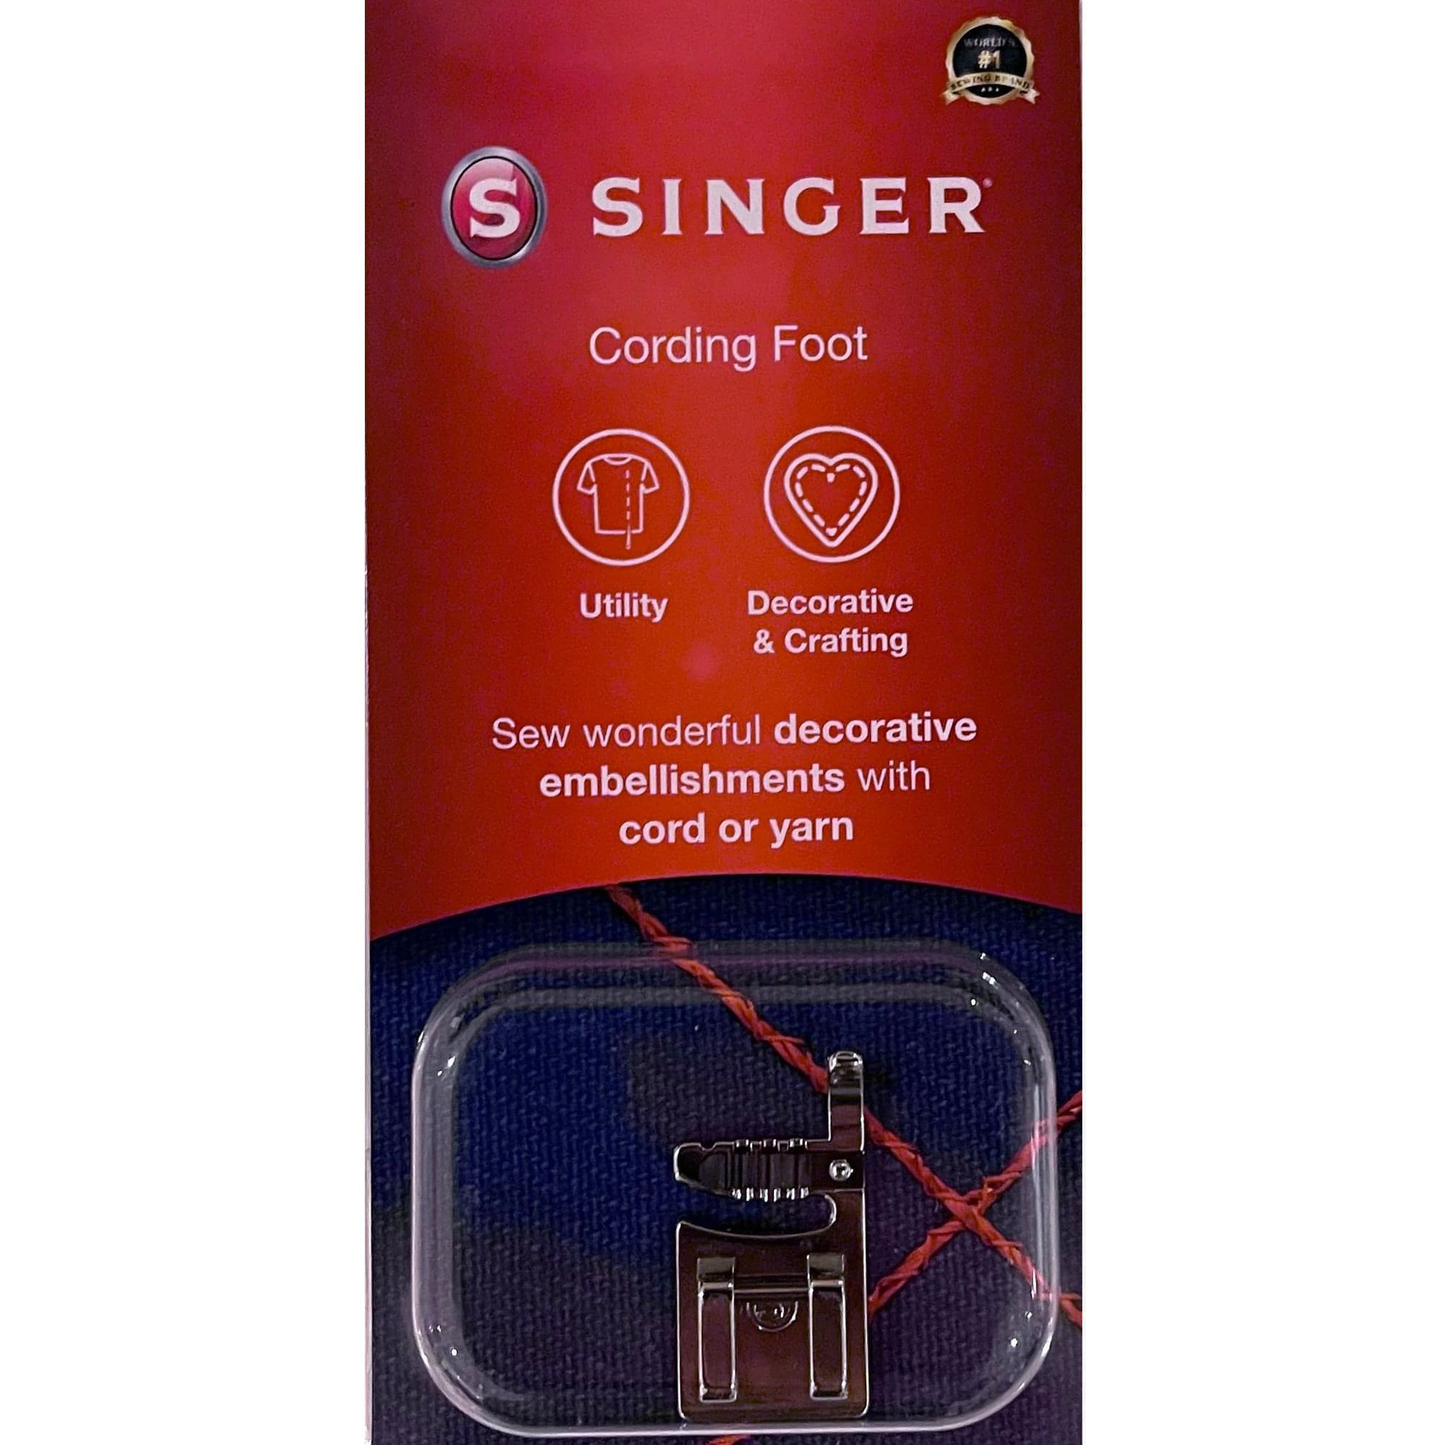 Cording Foot by Singer